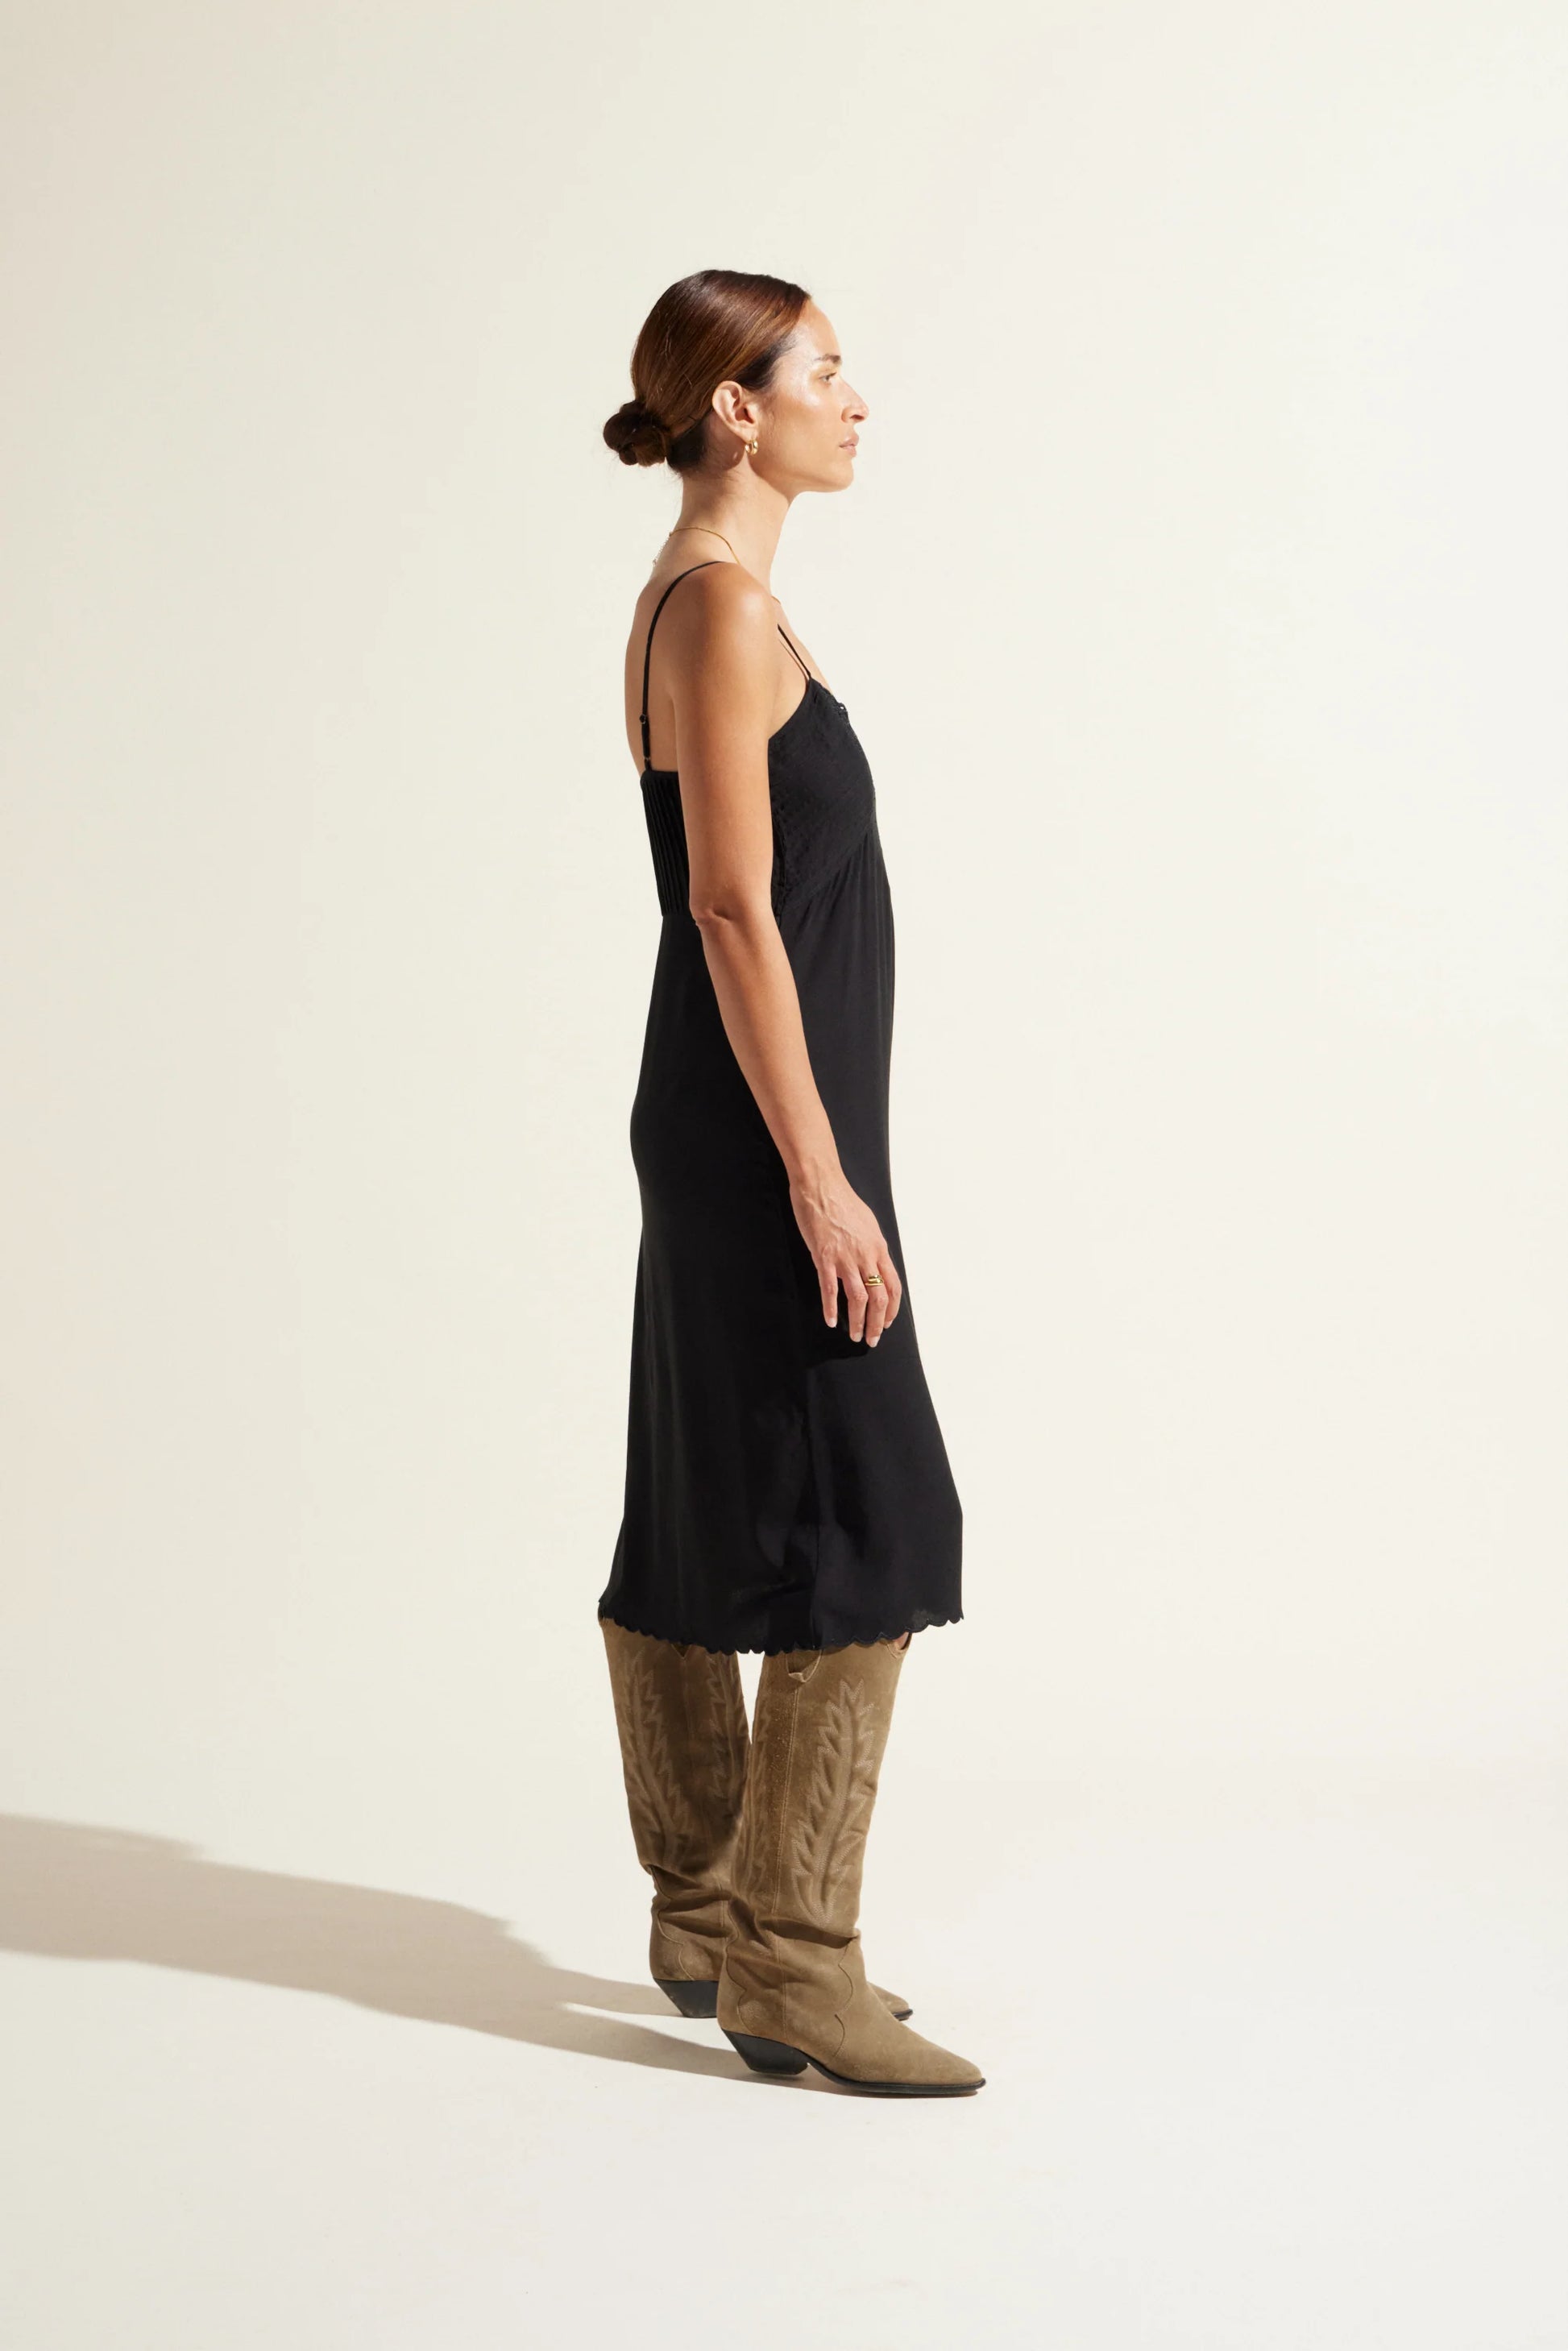 An easy to wear throw on midi dress versatile for day or night.